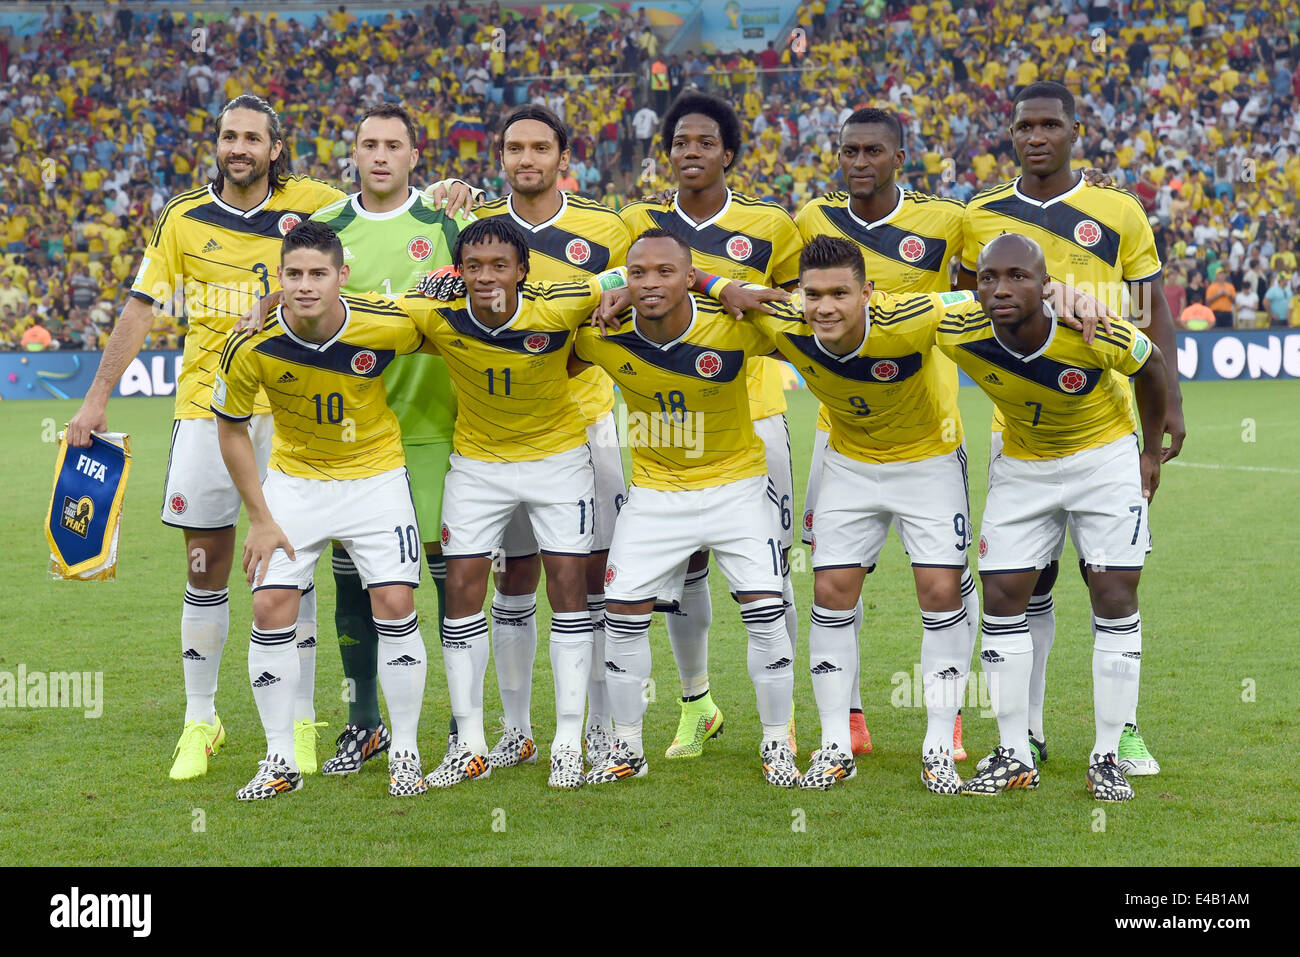 Rio De Janeiro, Brazil. 28th June, 2014. Colombia team group line-up (COL) Football/Soccer : Colombia team group shot (Top row - L to R) Mario Yepes, David Ospina, Abel Aguilar, Carlos Sanchez, Jackson Martinez, Cristian Zapata, (Bottom row - L to R) James Rodriguez, Juan Cuadrado, Juan Camilo Zuniga, Teofilo Gutierrez and Pablo Armero before the FIFA World Cup Brazil 2014 Round of 16 match between Colombia 2-0 Uruguay at Estadio do Maracana in Rio De Janeiro, Brazil . © SONG Seak-In/AFLO/Alamy Live News Stock Photo